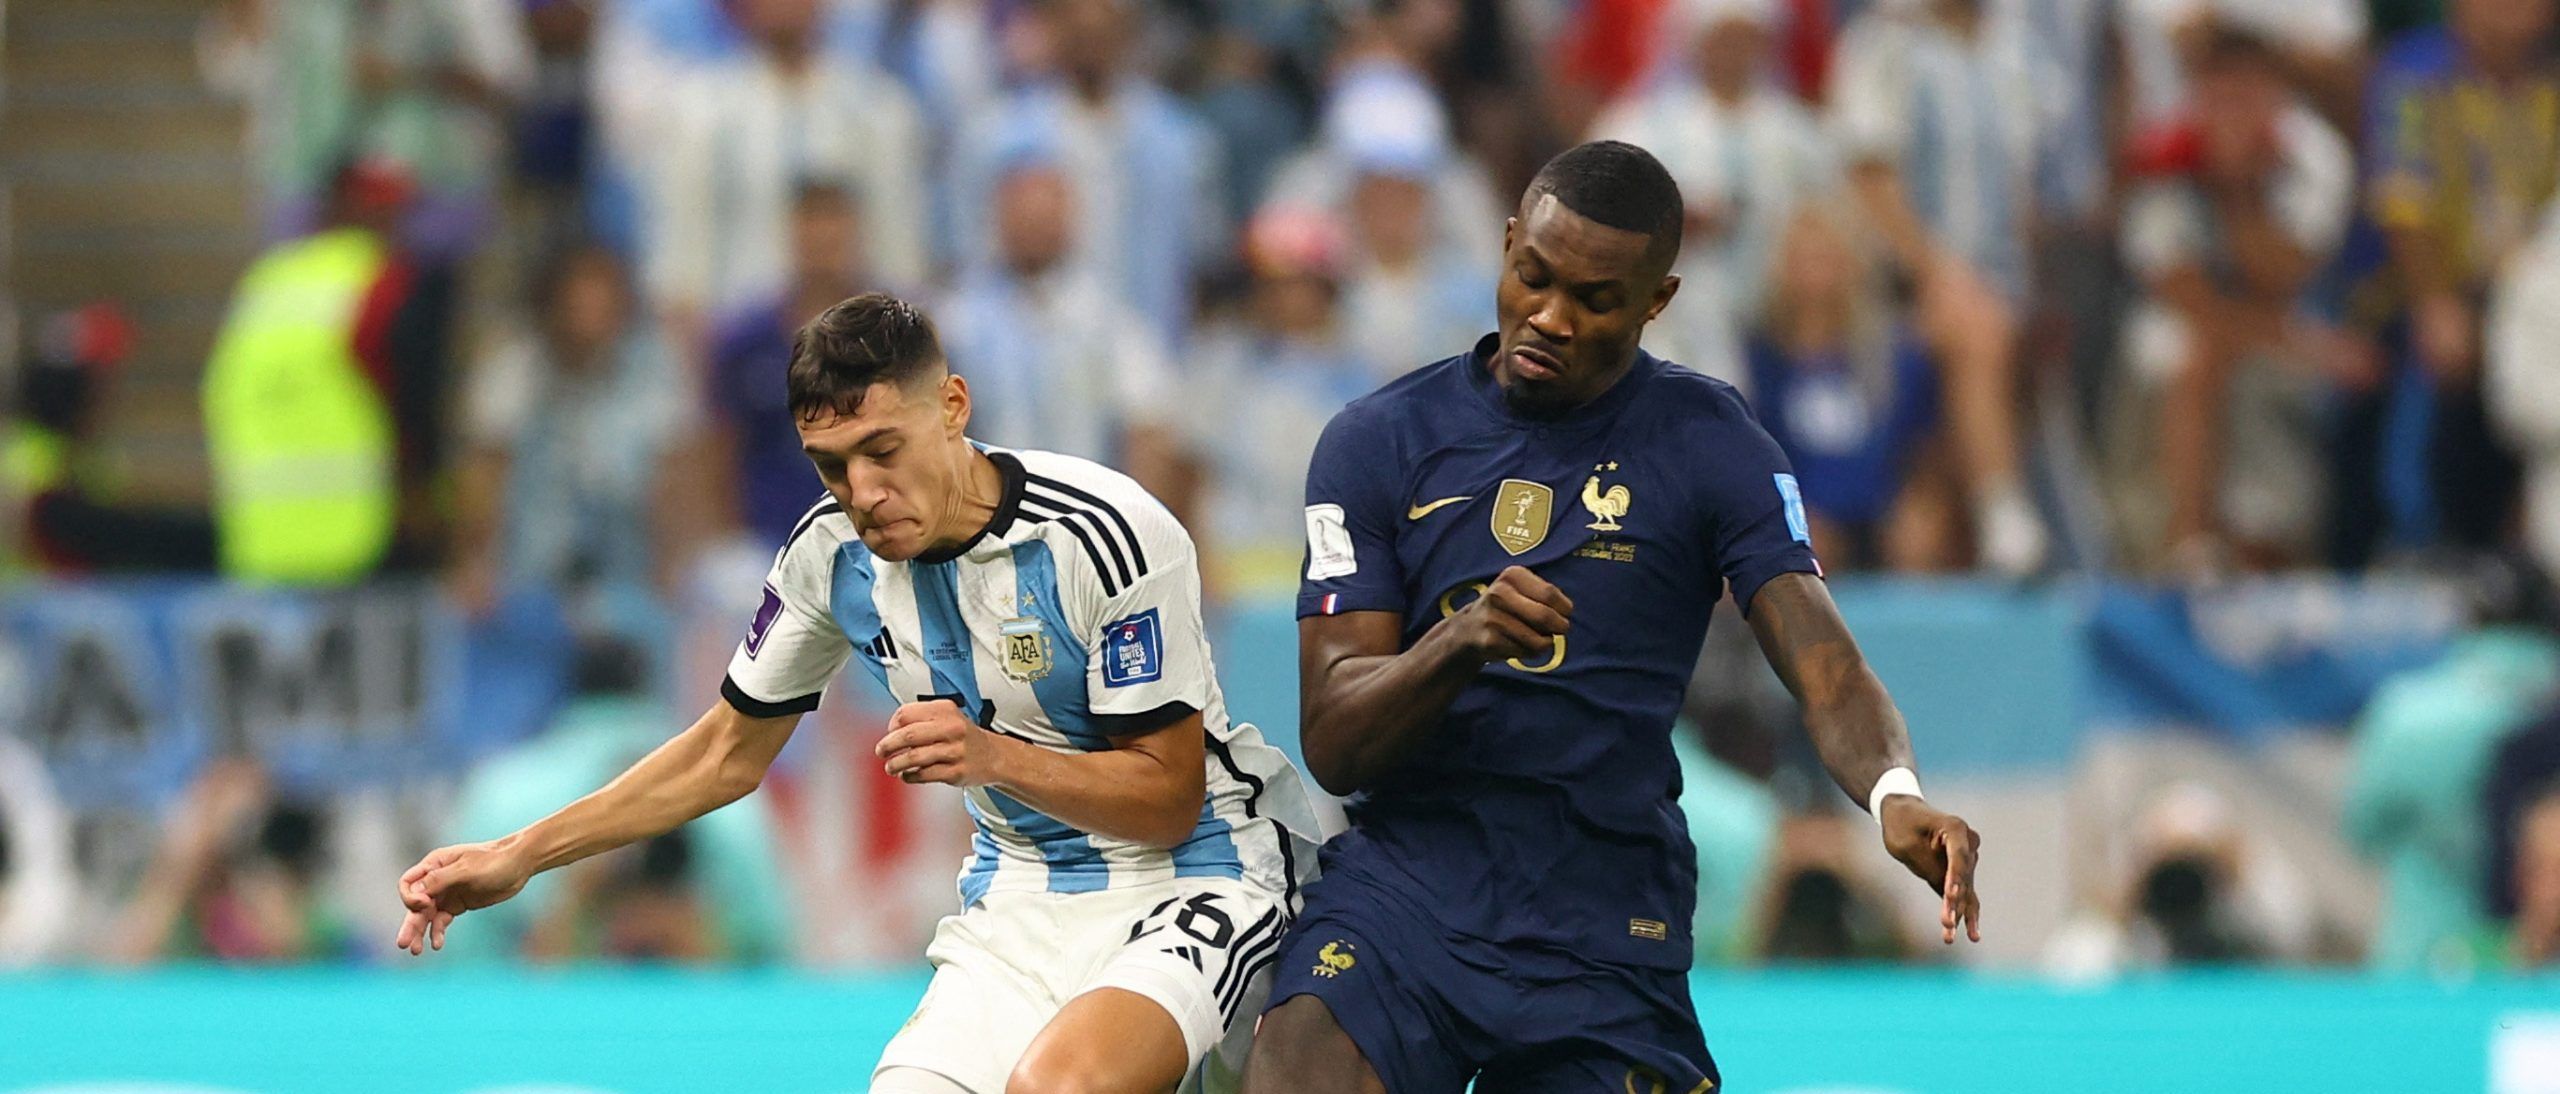 Soccer Football - FIFA World Cup Qatar 2022 - Final - Argentina v France - Lusail Stadium, Lusail, Qatar - December 18, 2022 Argentina's Nahuel Molina in action with France's Marcus Thuram REUTERS/Carl Recine